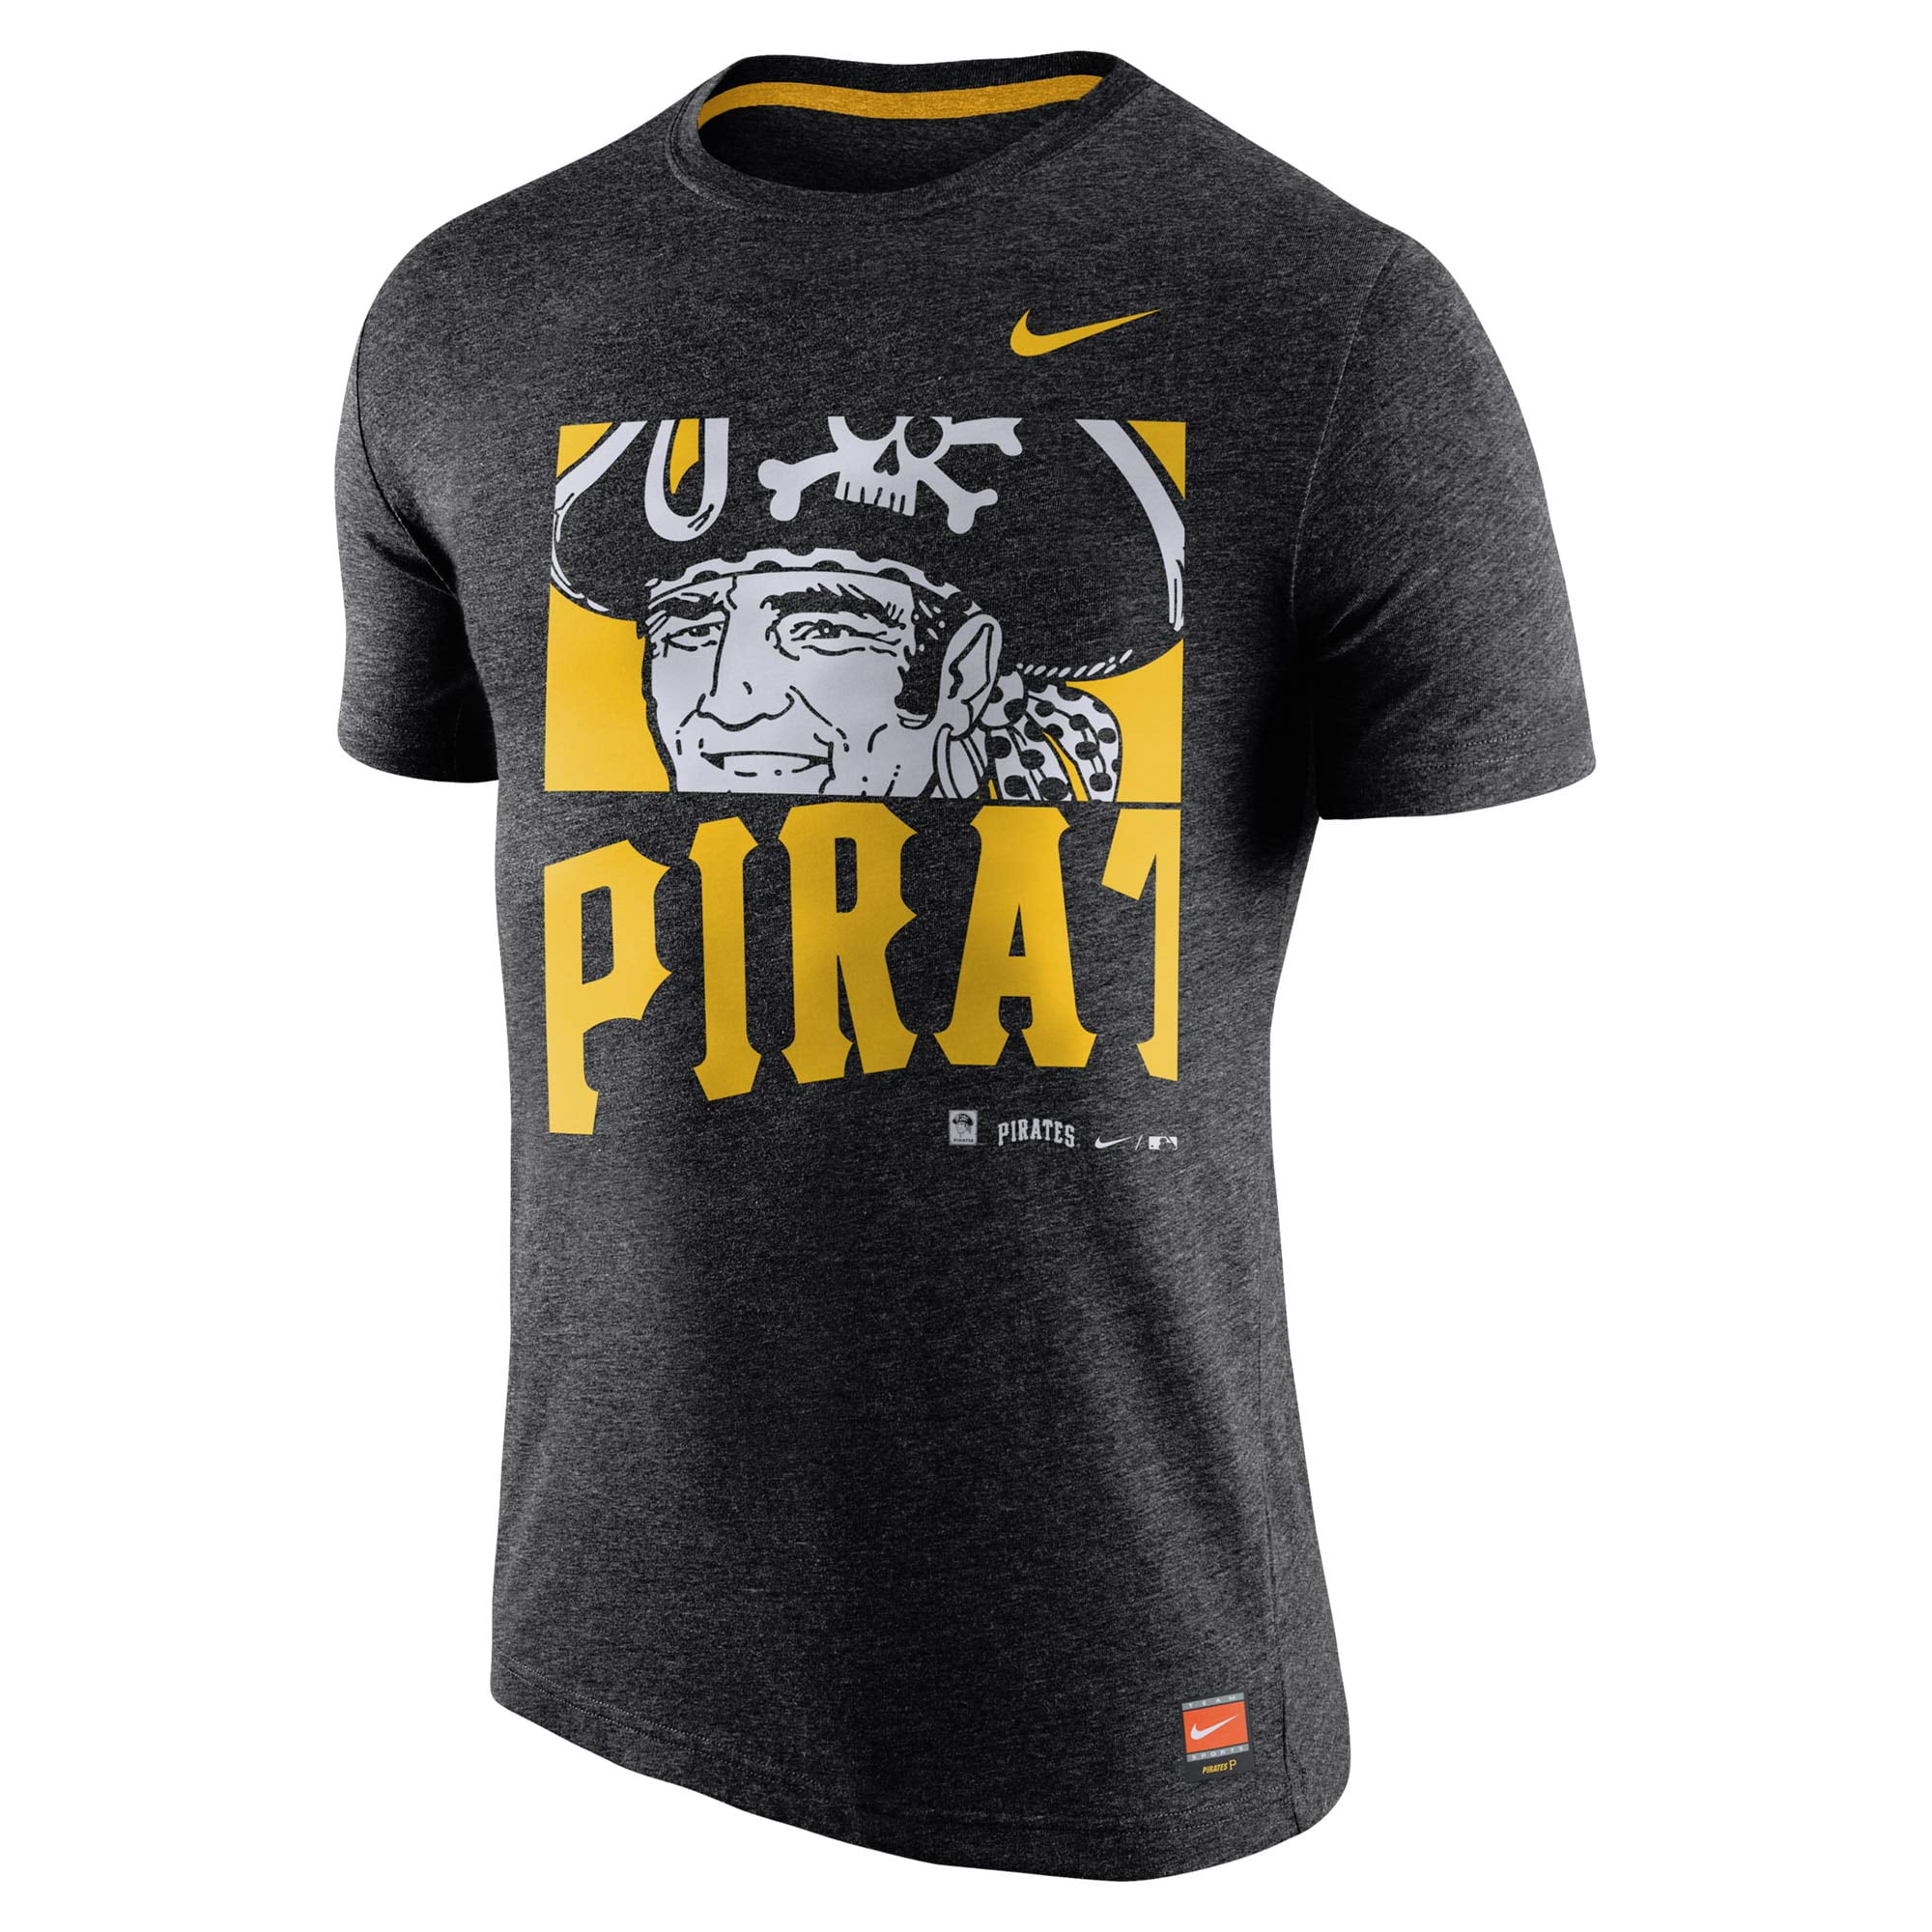 Men's Nike Heathered Black Pittsburgh Pirates Cooperstown Collection ...